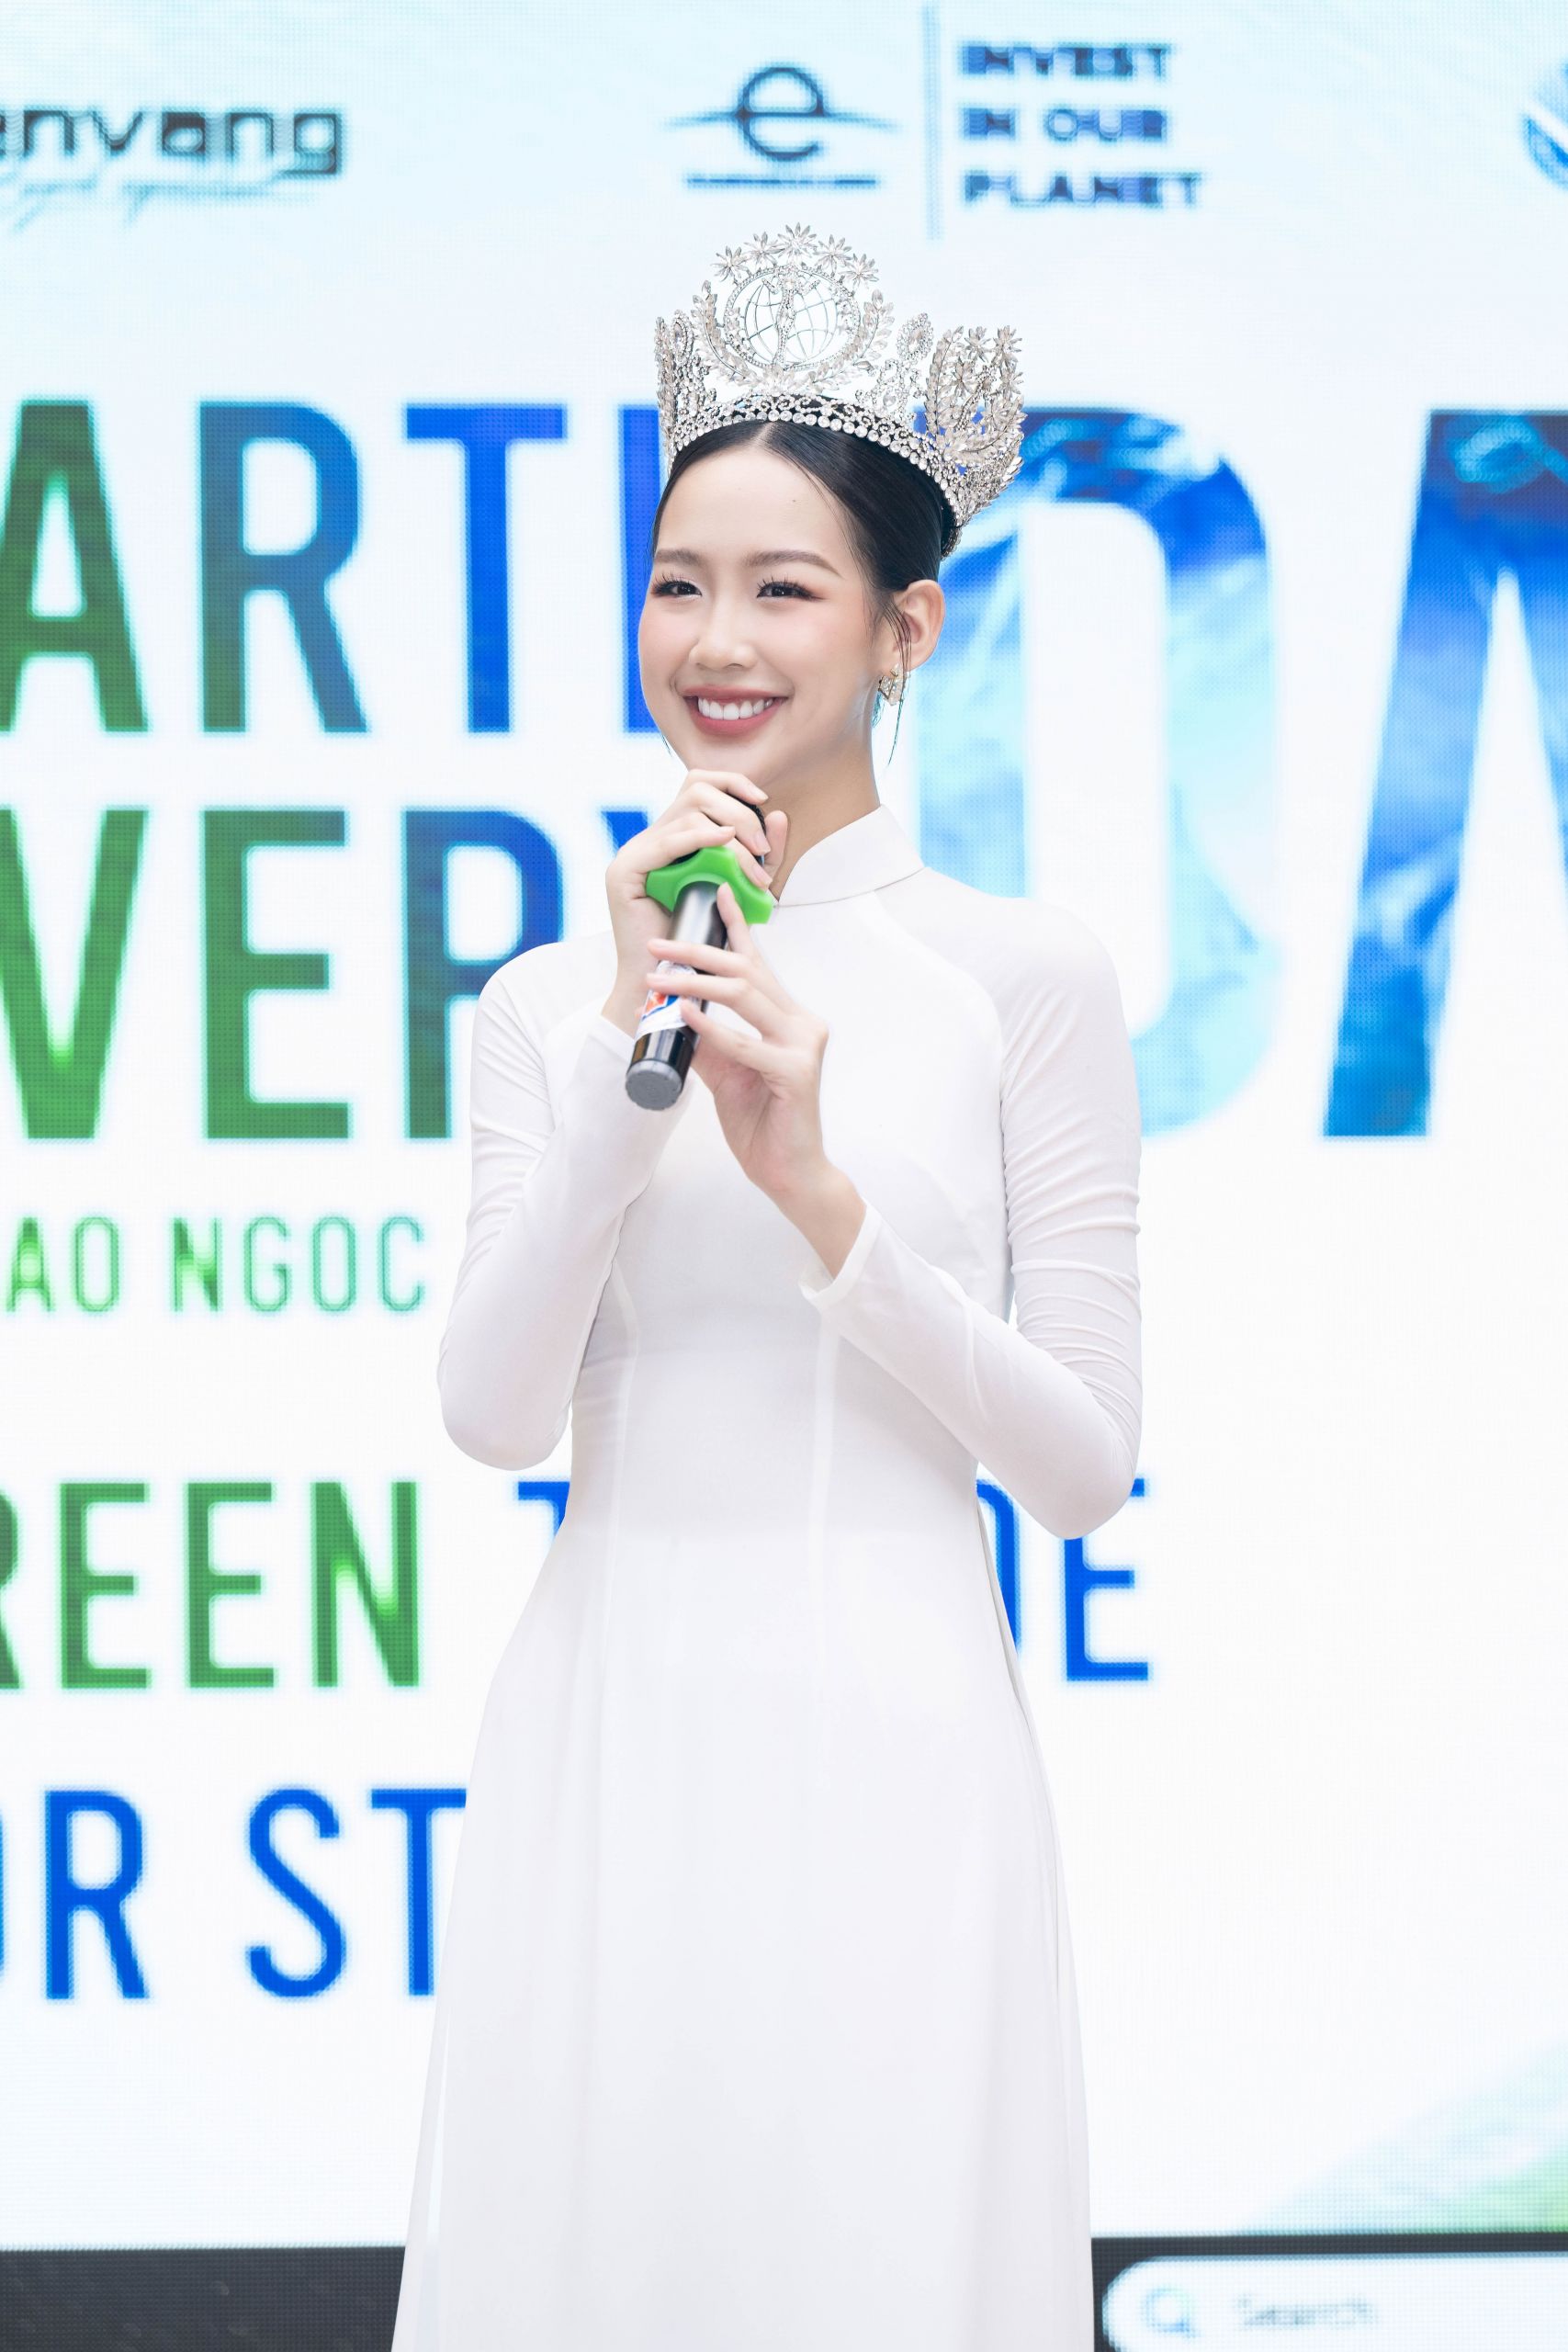 Miss Bao Ngoc launches environmental inspiration project “Earth Day everyday by Bao Ngoc”